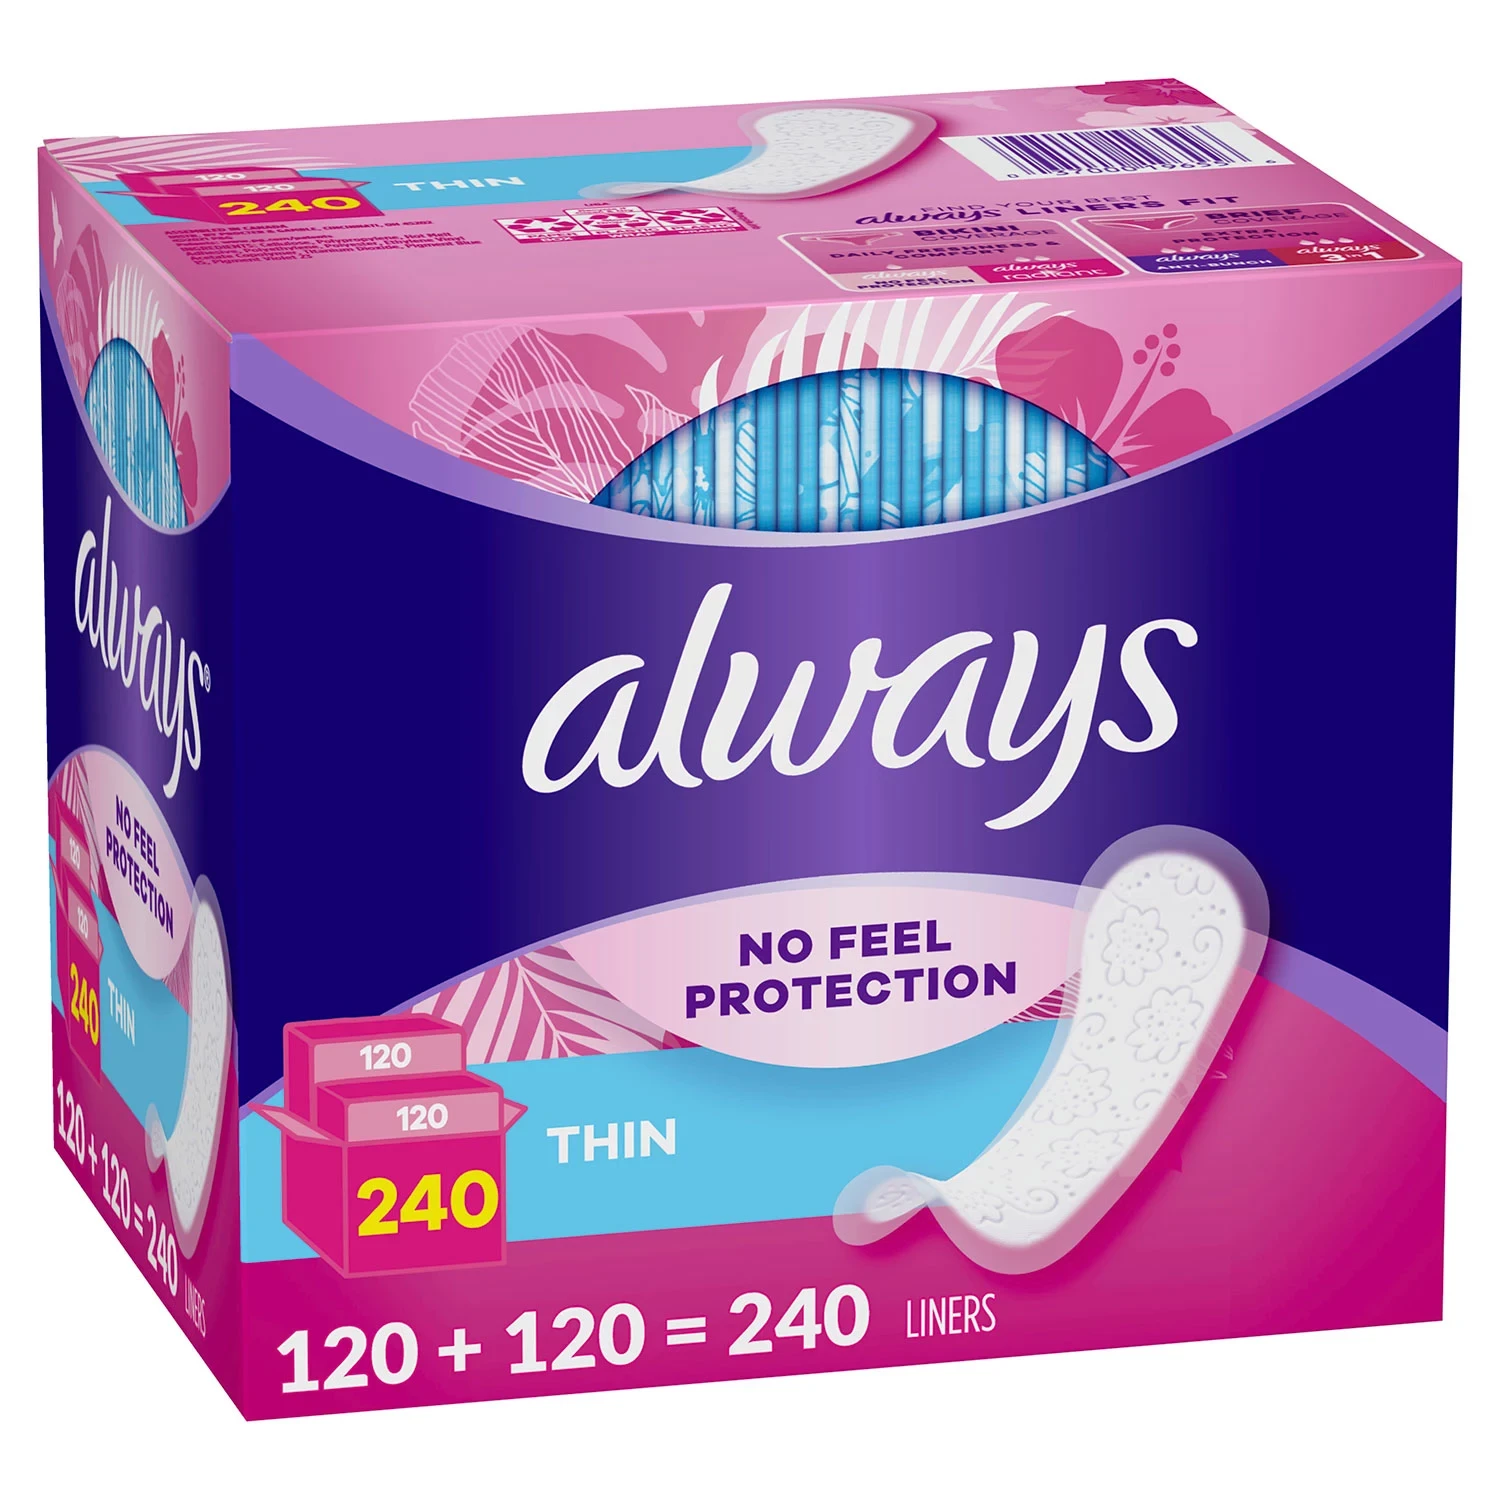 [SET OF 3] - Always Daily's Thin Liners (240 ct./pk.),